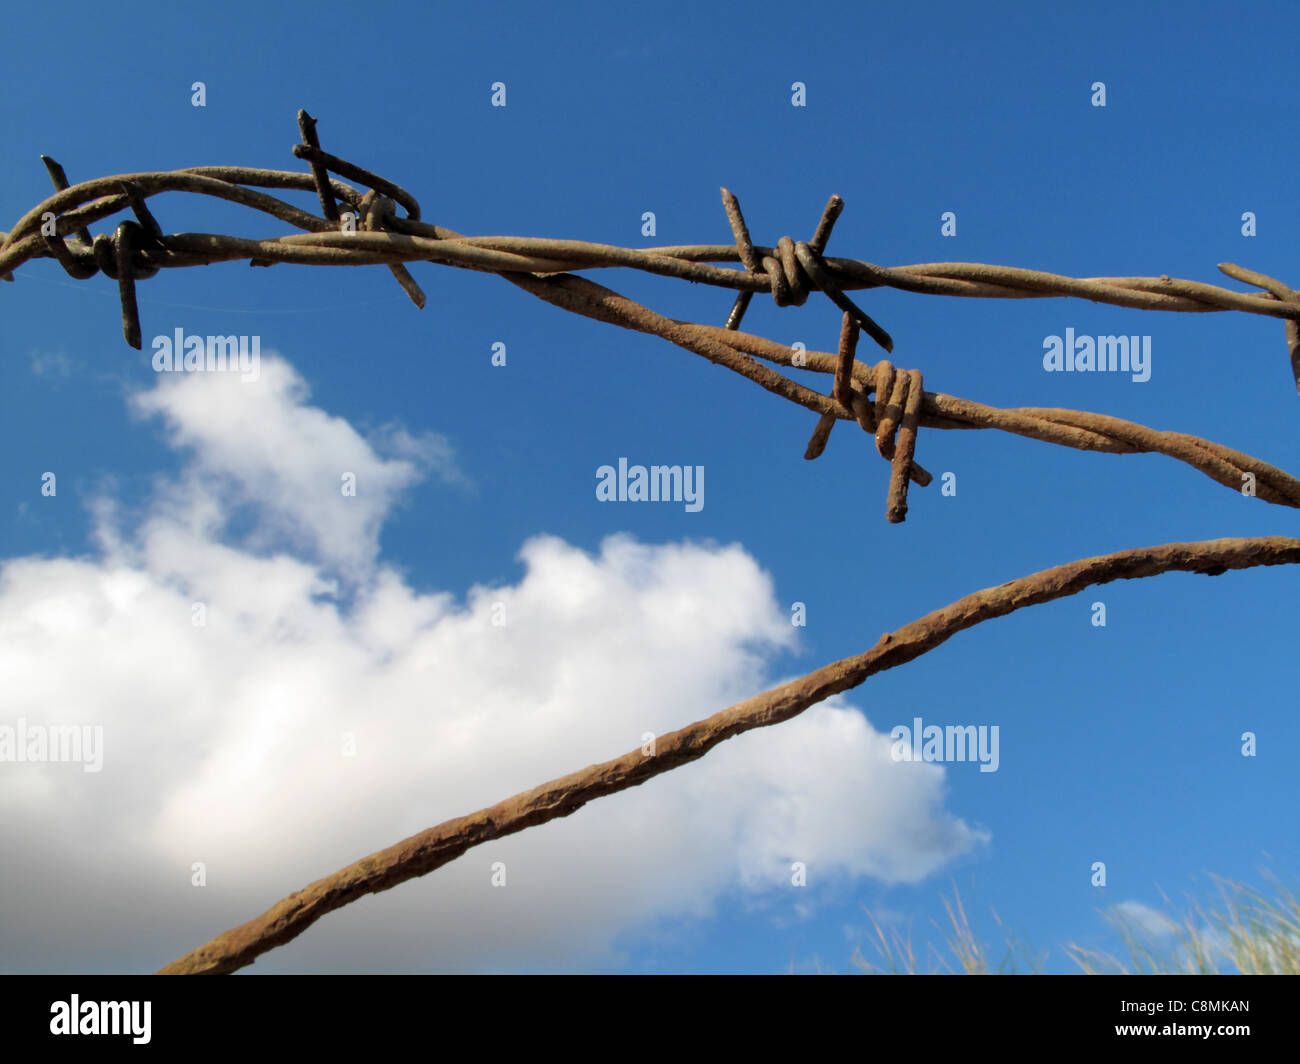 A close up of a rusty section of a barbed wire fence taken against a blue sky and clouds. Stock Photo